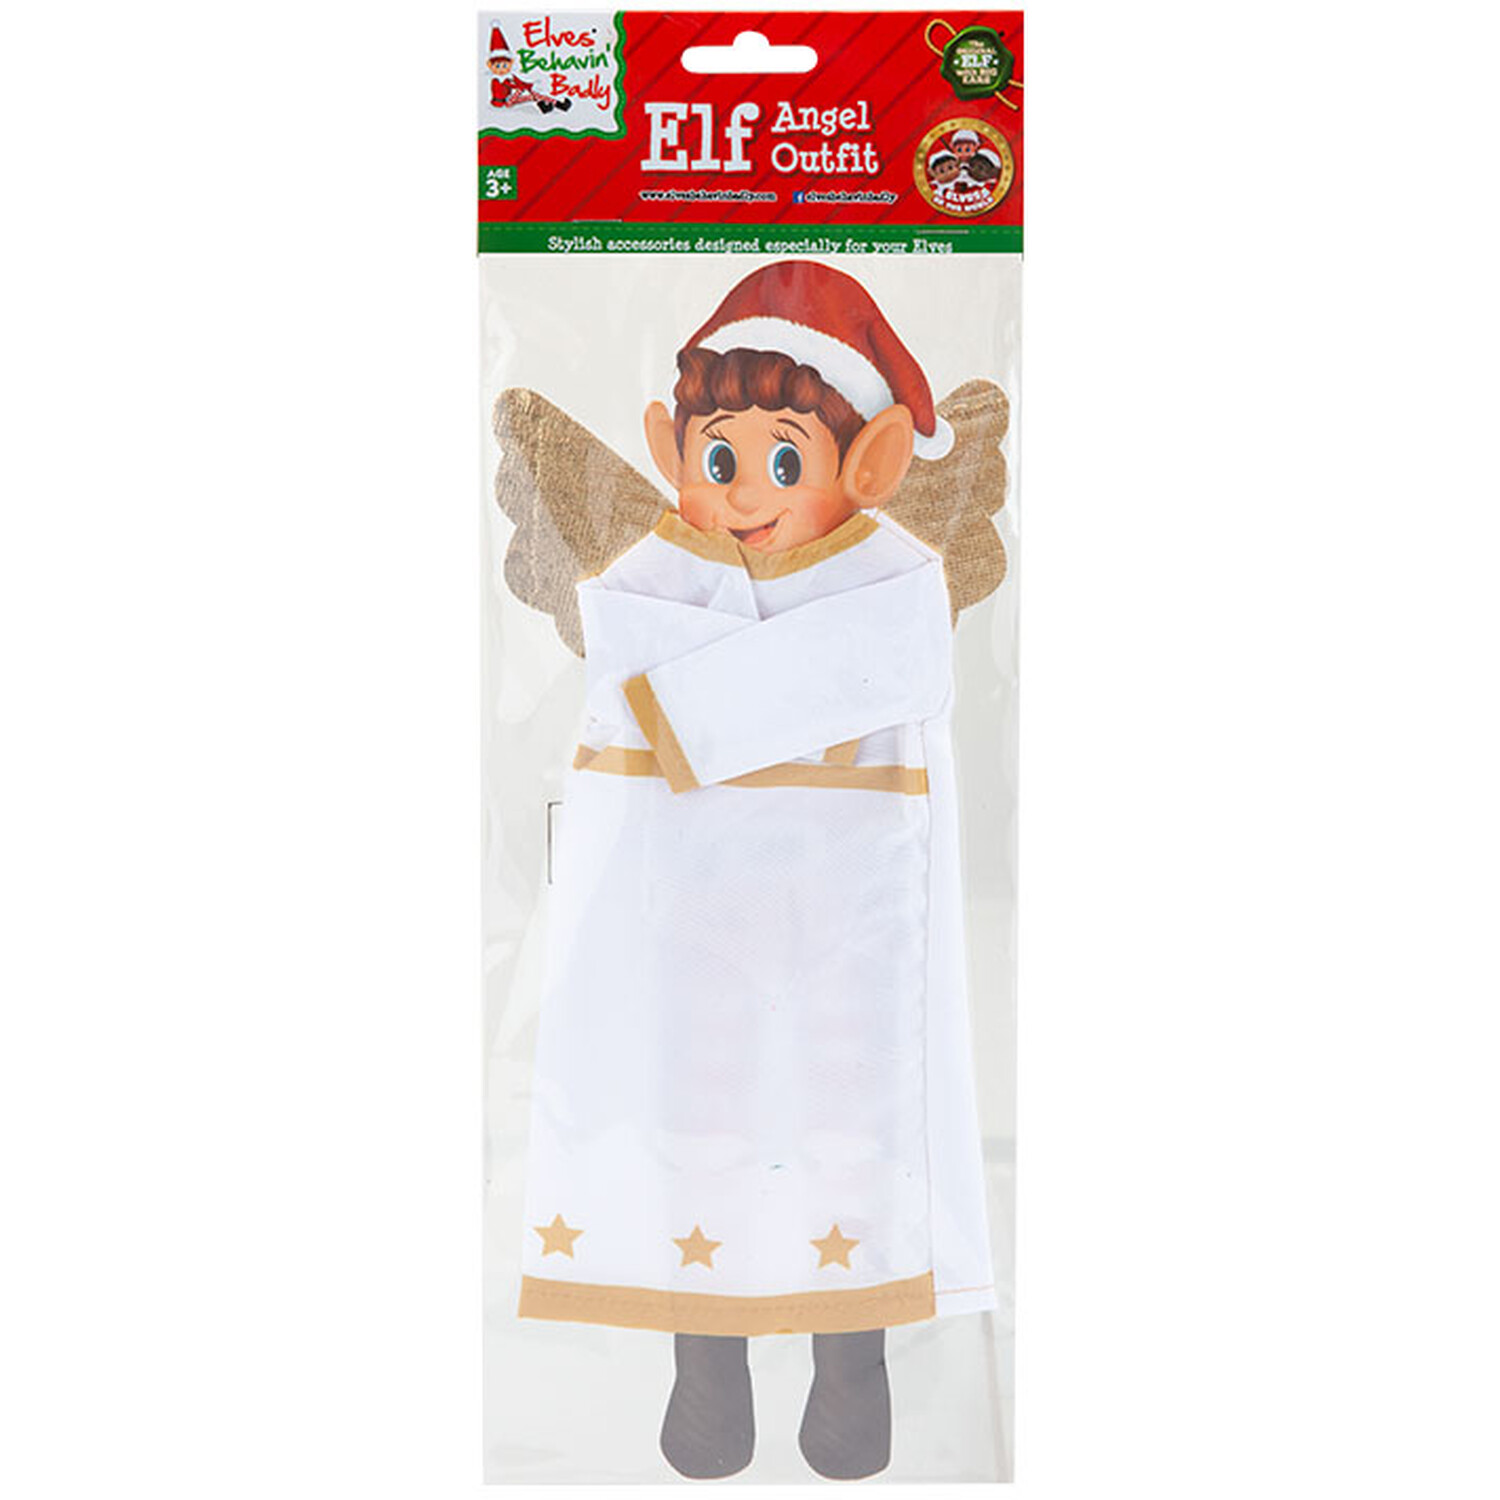 Elf Angel Outfit Image